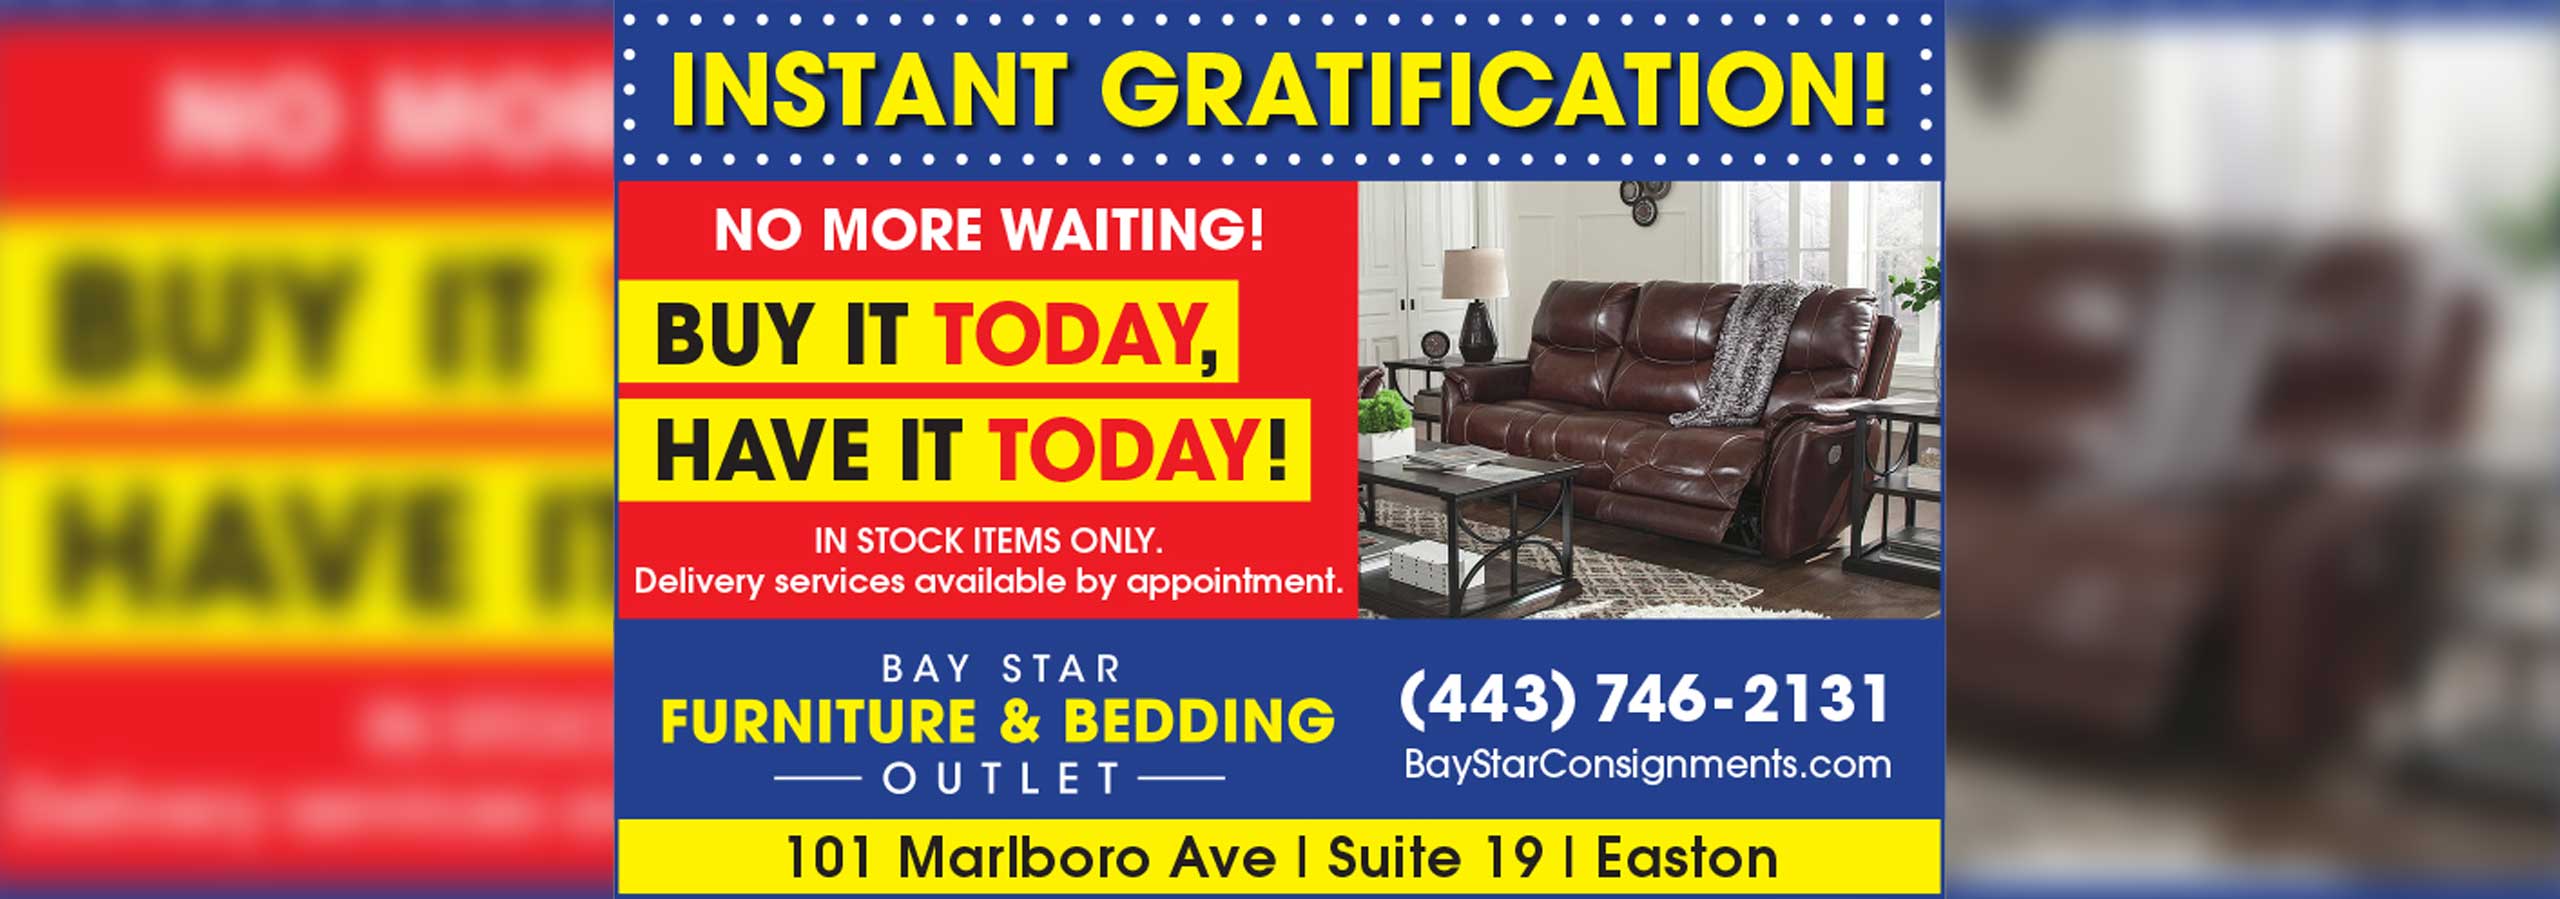 Instant Gratification - Buy it Today Have it Today